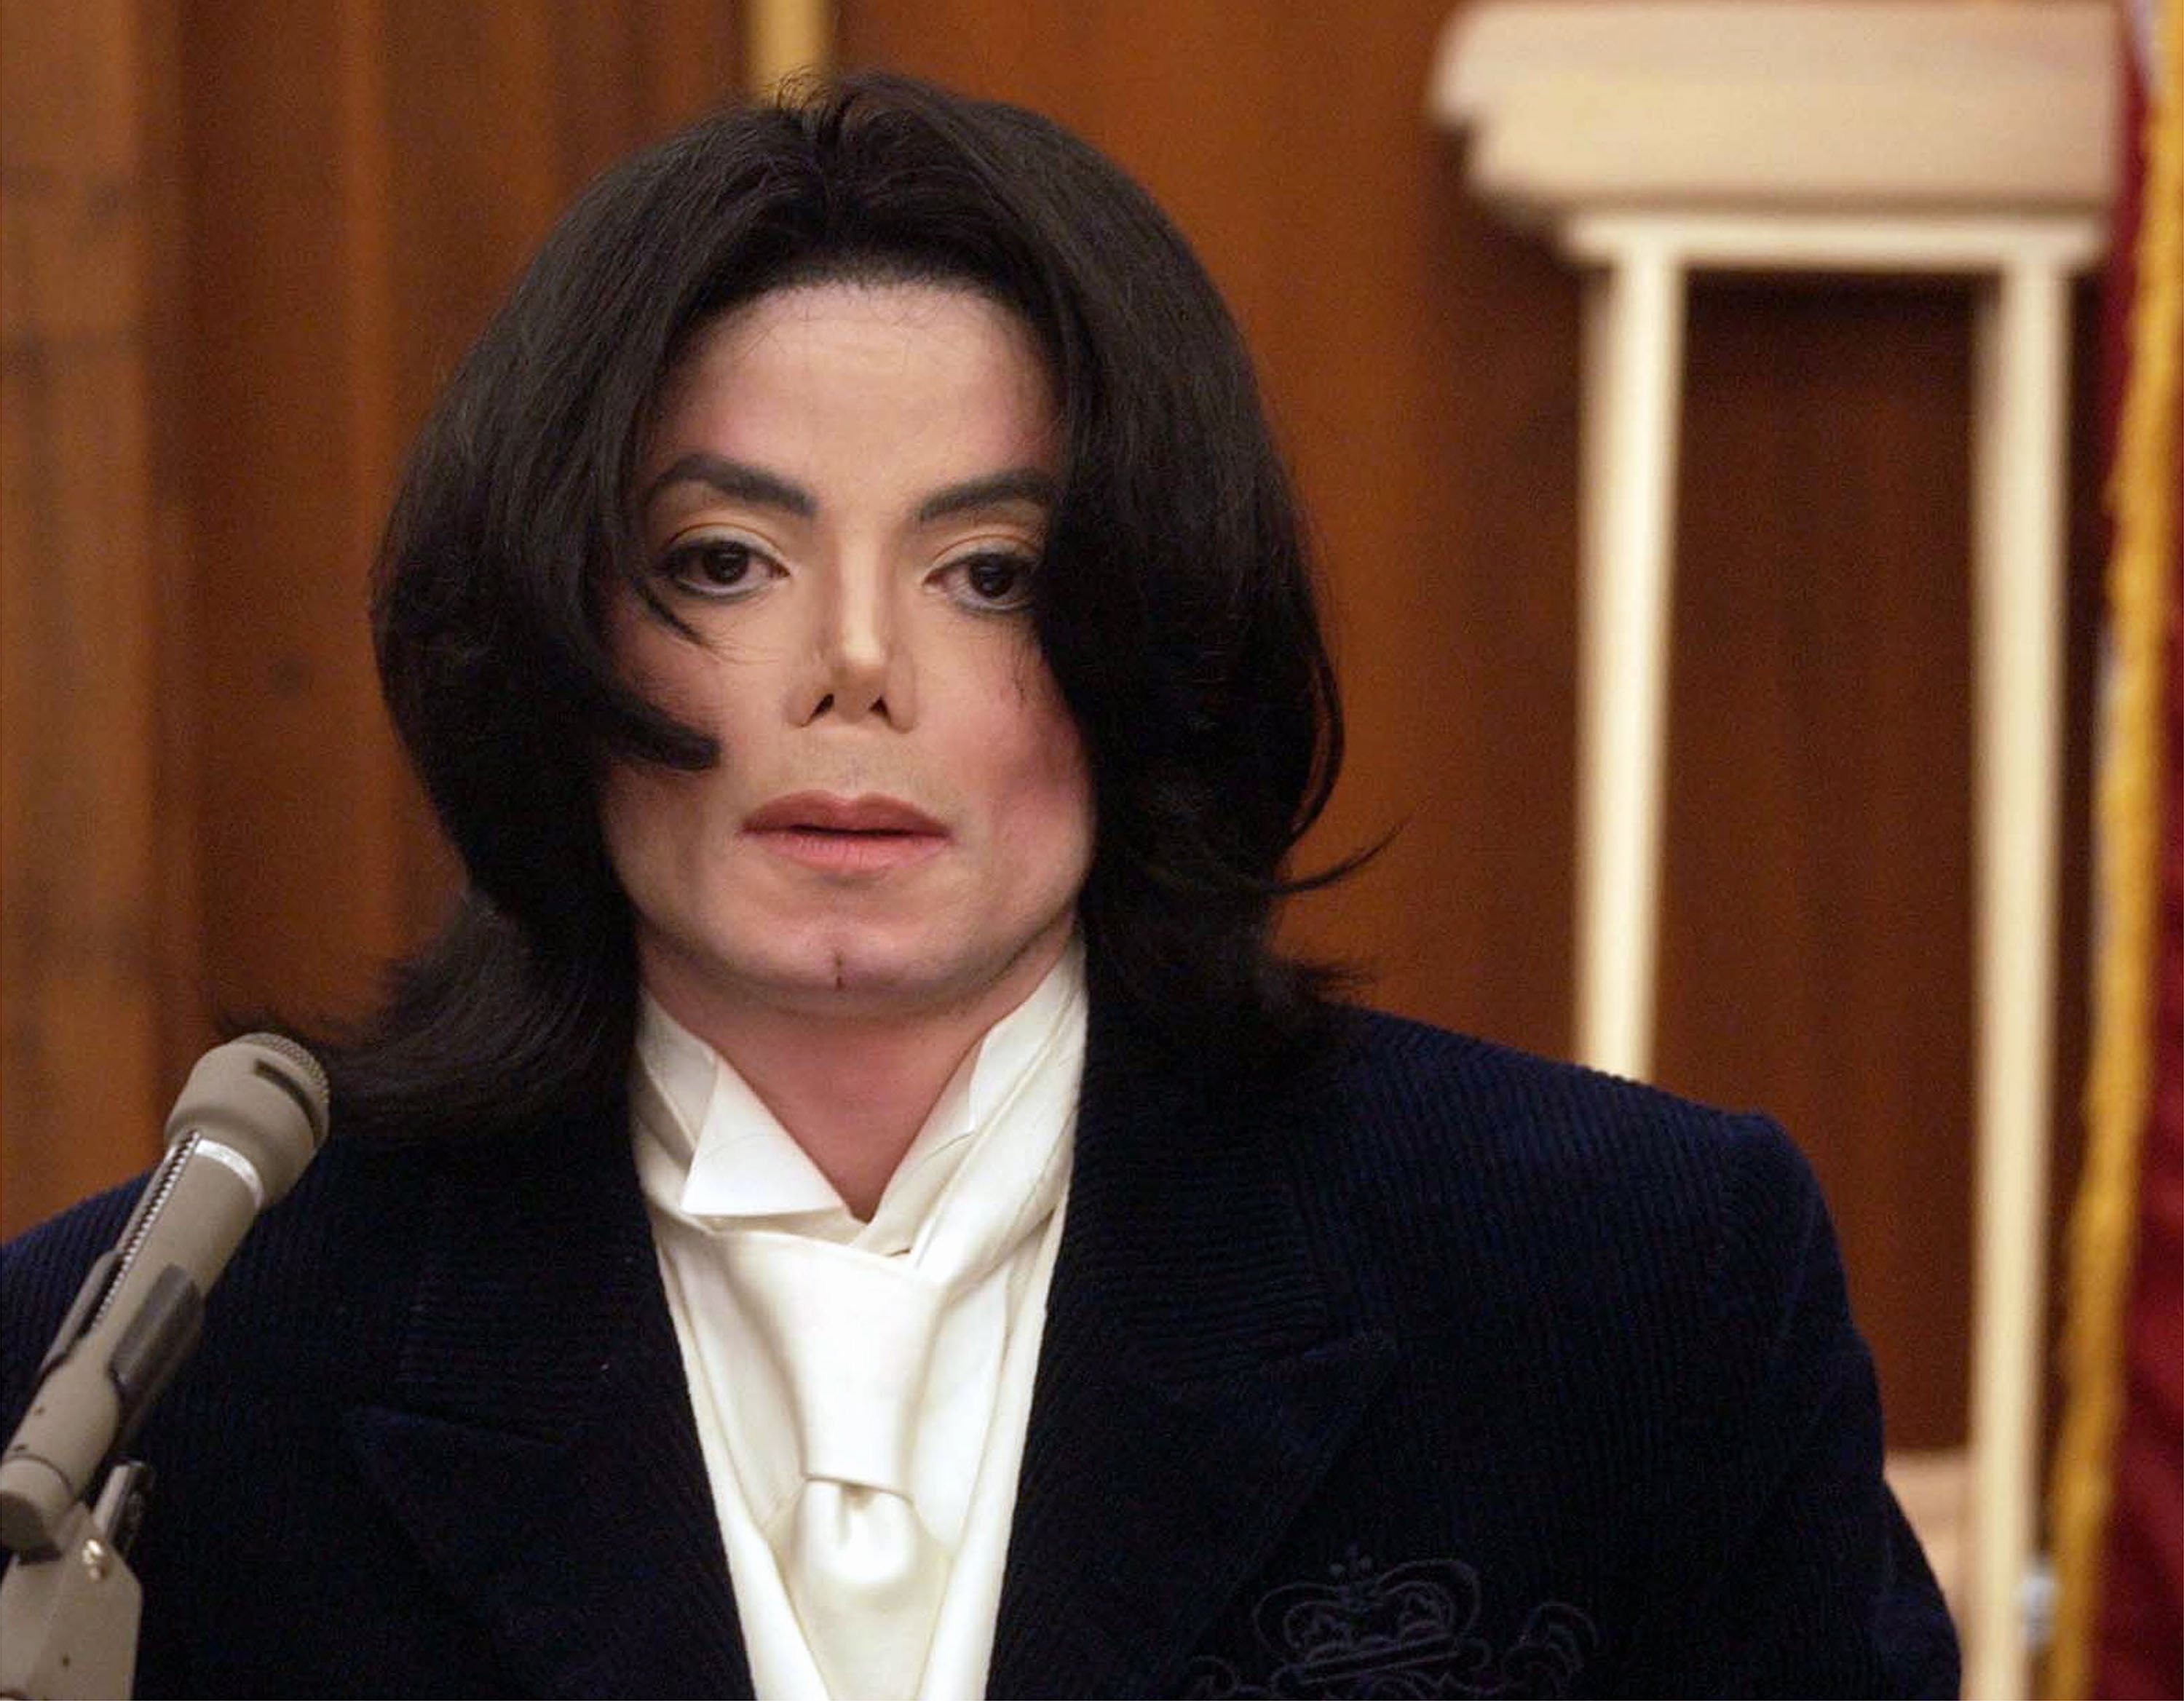 Michael Jackson testifies during his civil trial in Santa Maria Superior Court on December 3, 2002  | Photo: GettyImages